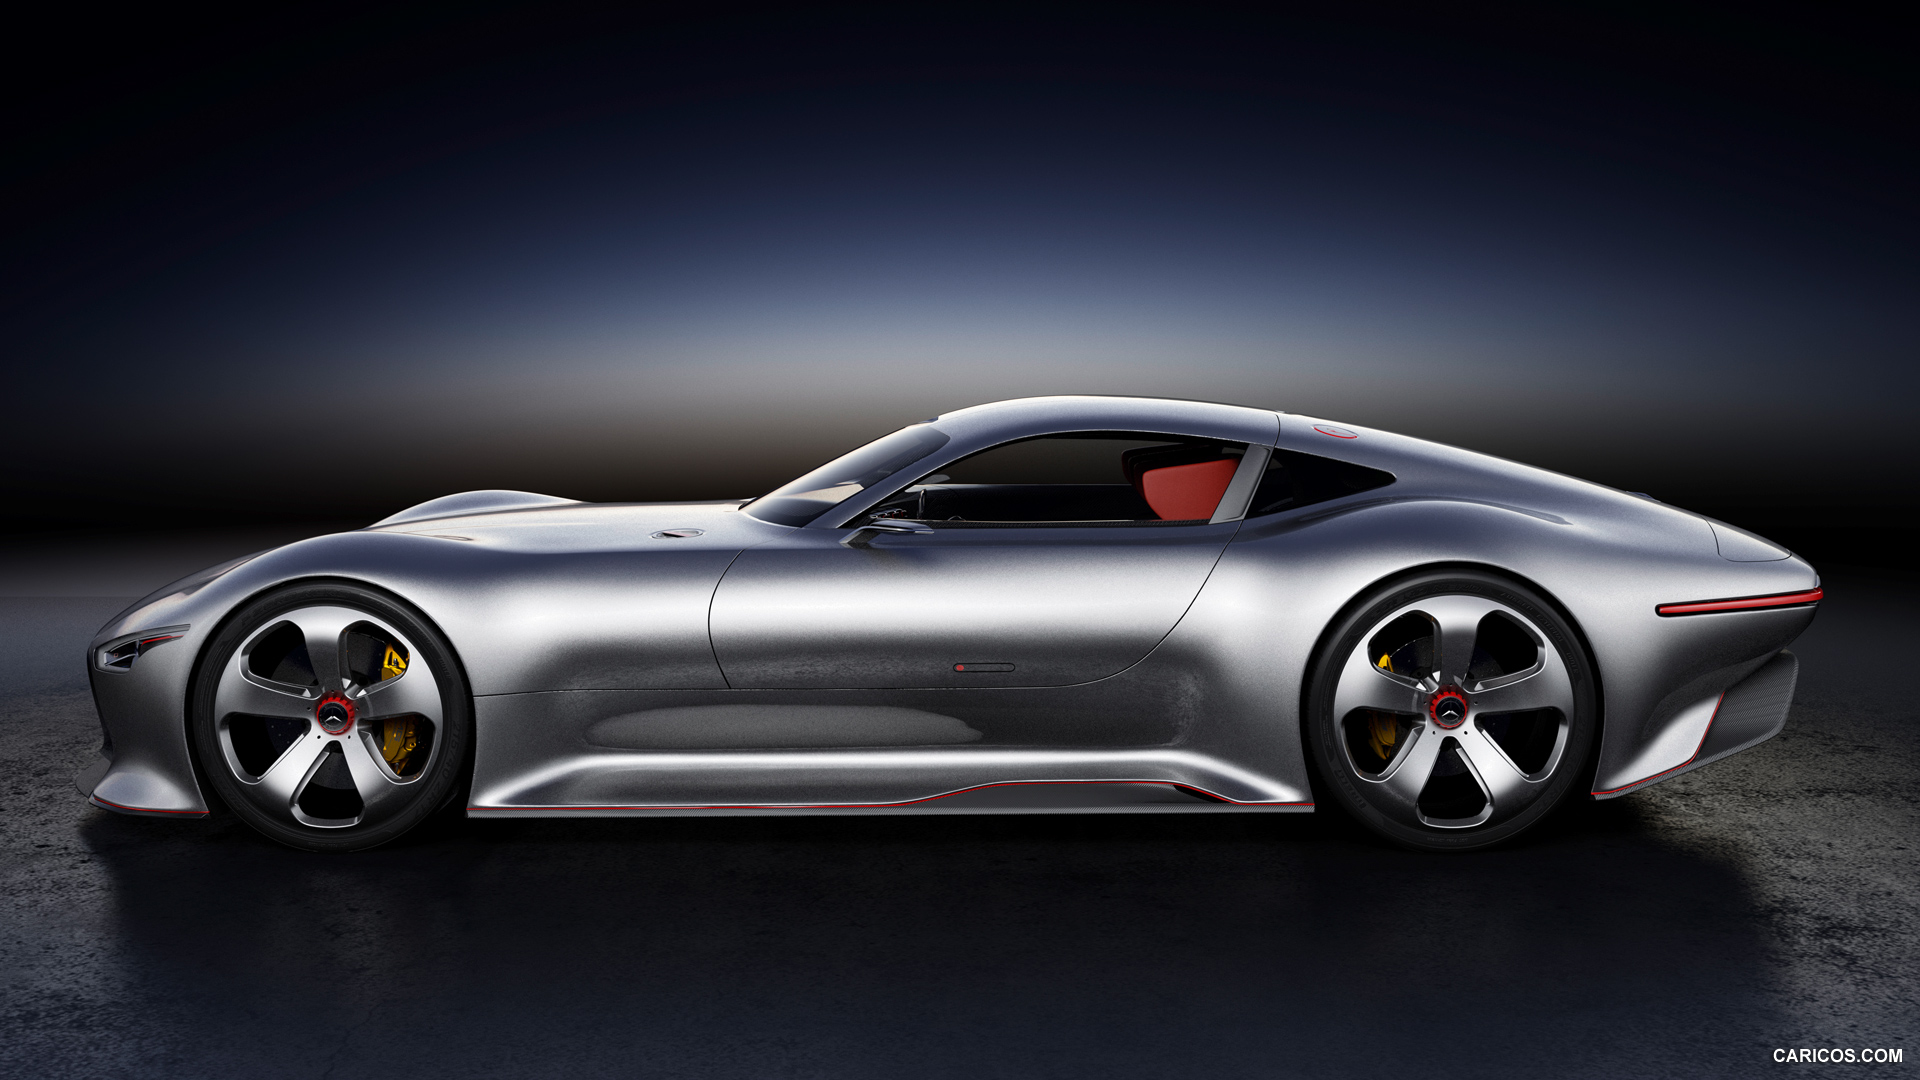 Mercedes-Benz AMG Vision Gran Turismo Concept (2013)  - Side, #17 of 25